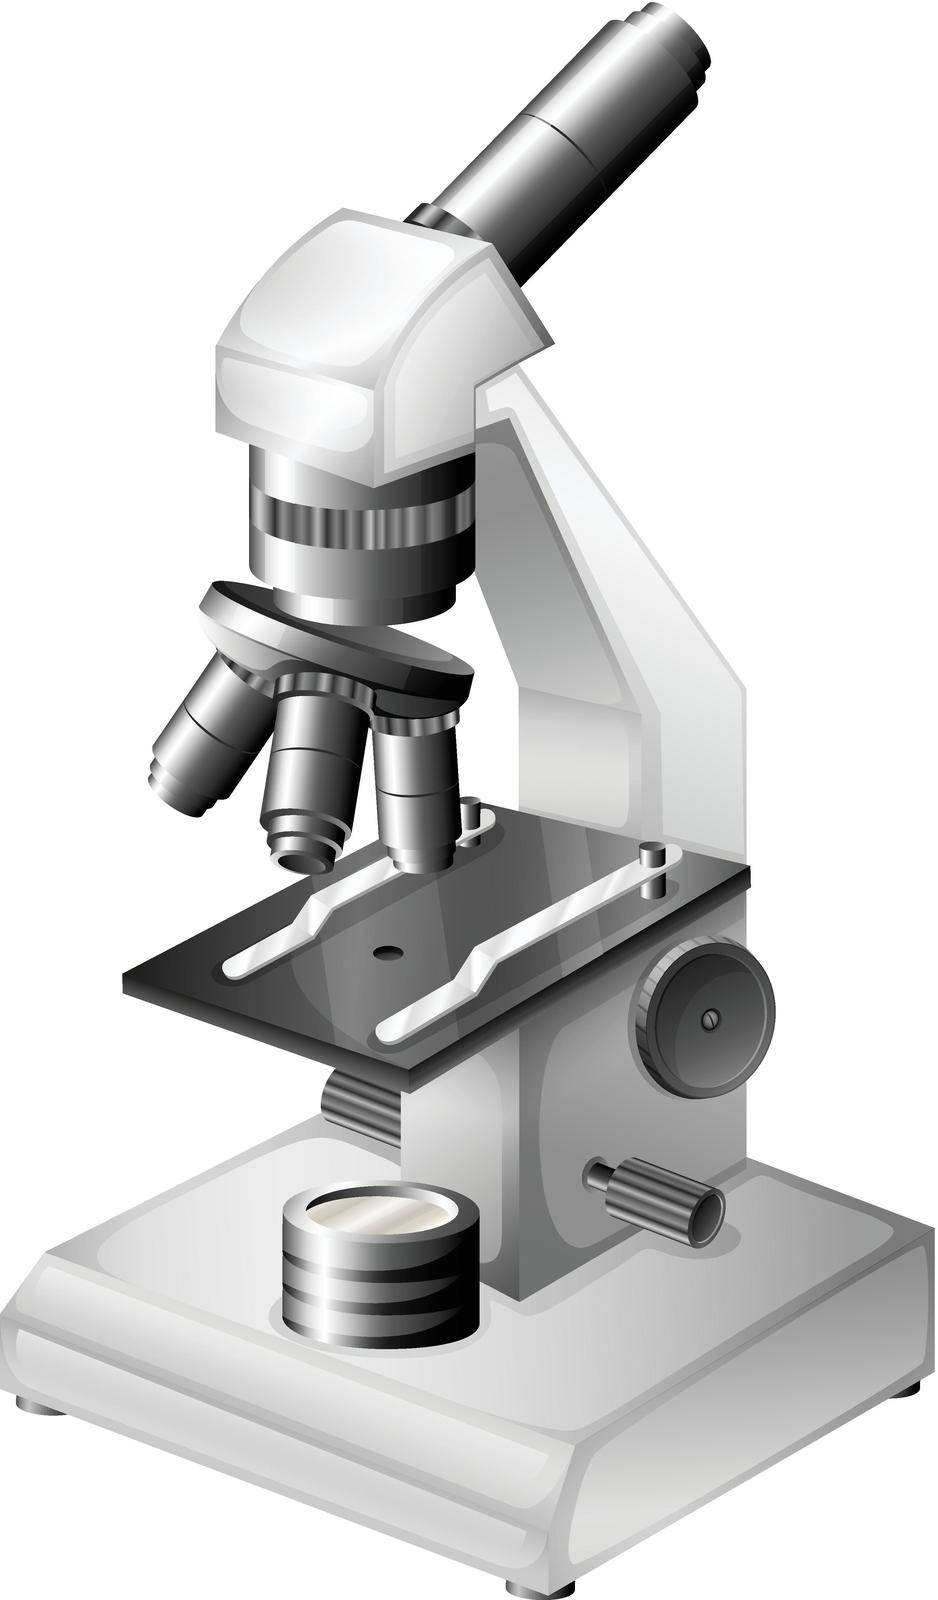 A microscopic instrument by iimages